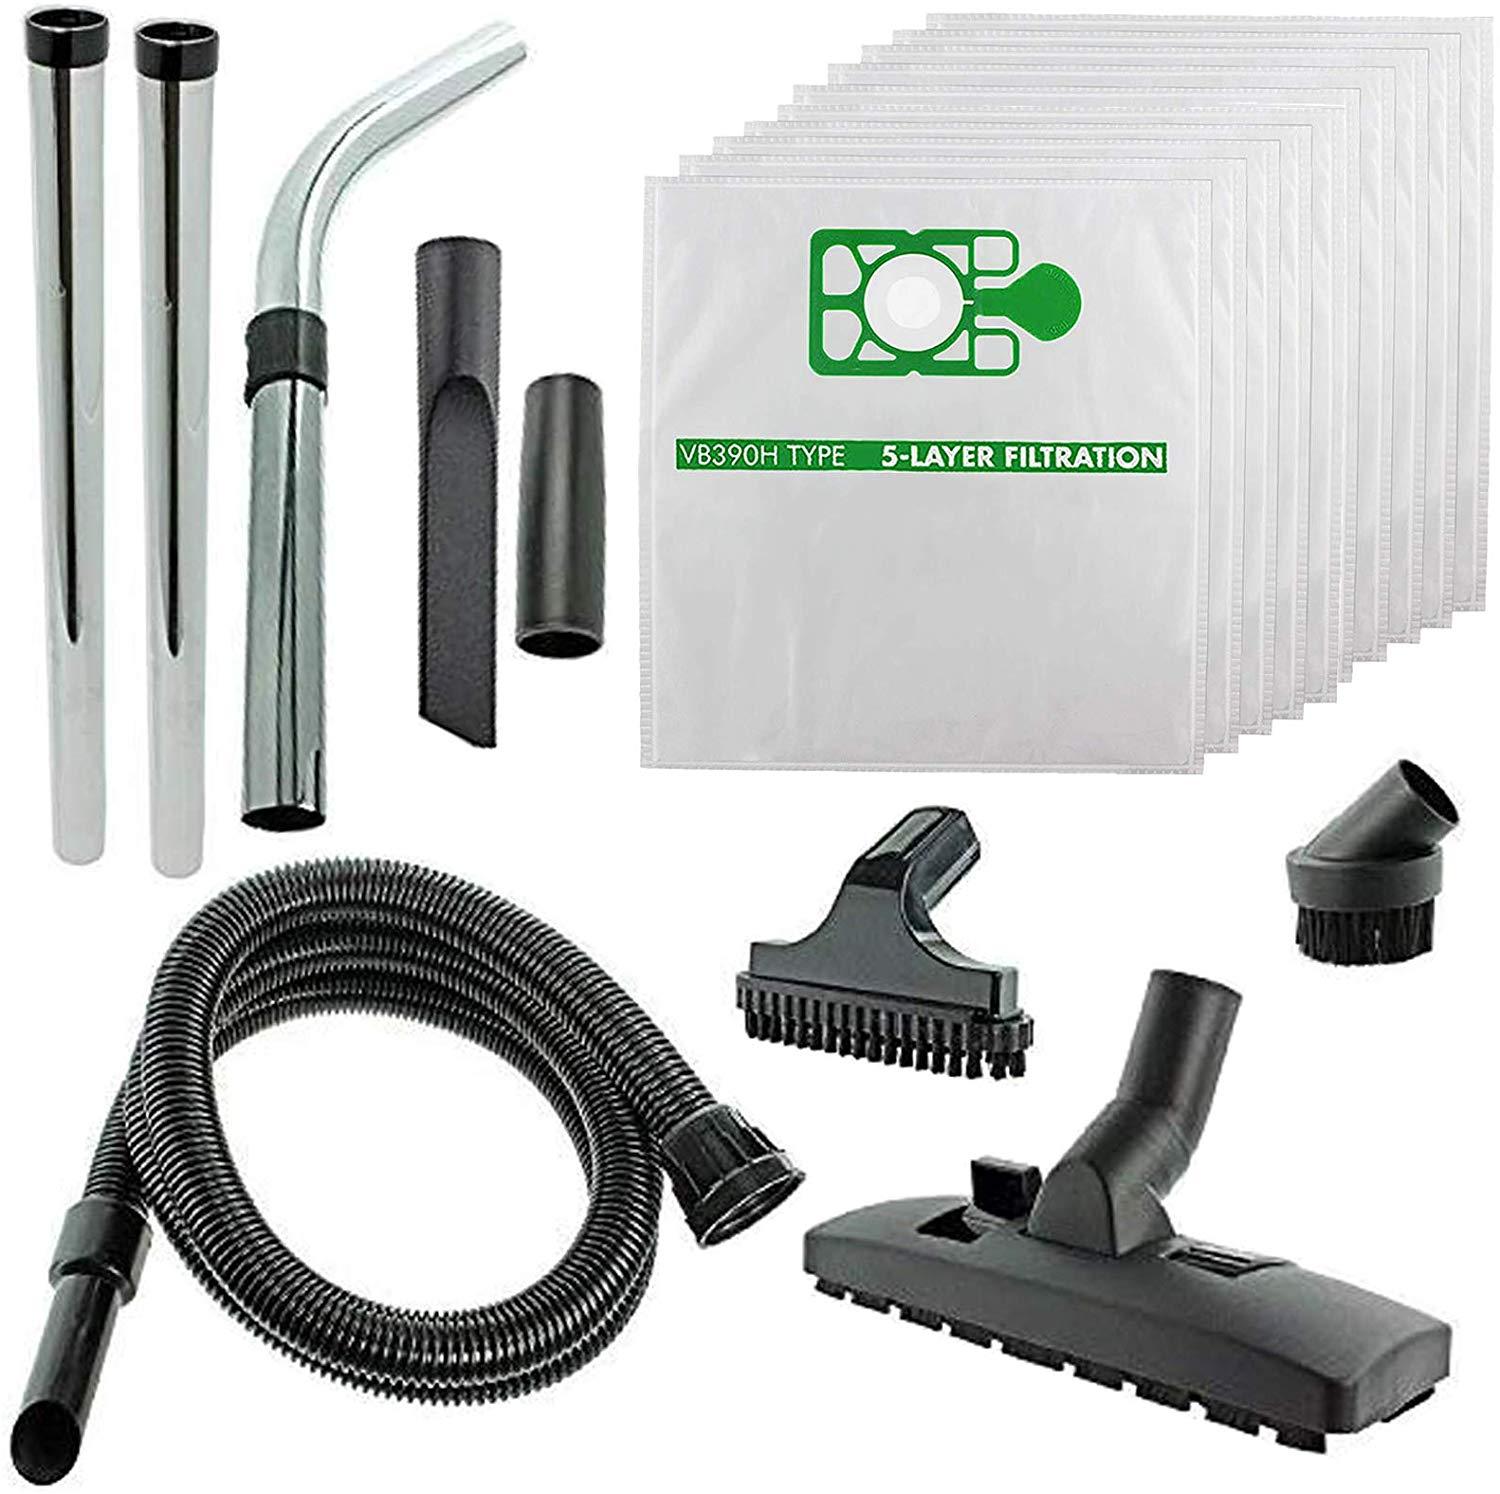 SPARES2GO Complete 2.5m Spare Parts Tool Kit + 10 Dust Bags for Numatic Henry NRV-200 XTRA HVX200A Vacuum Cleaner